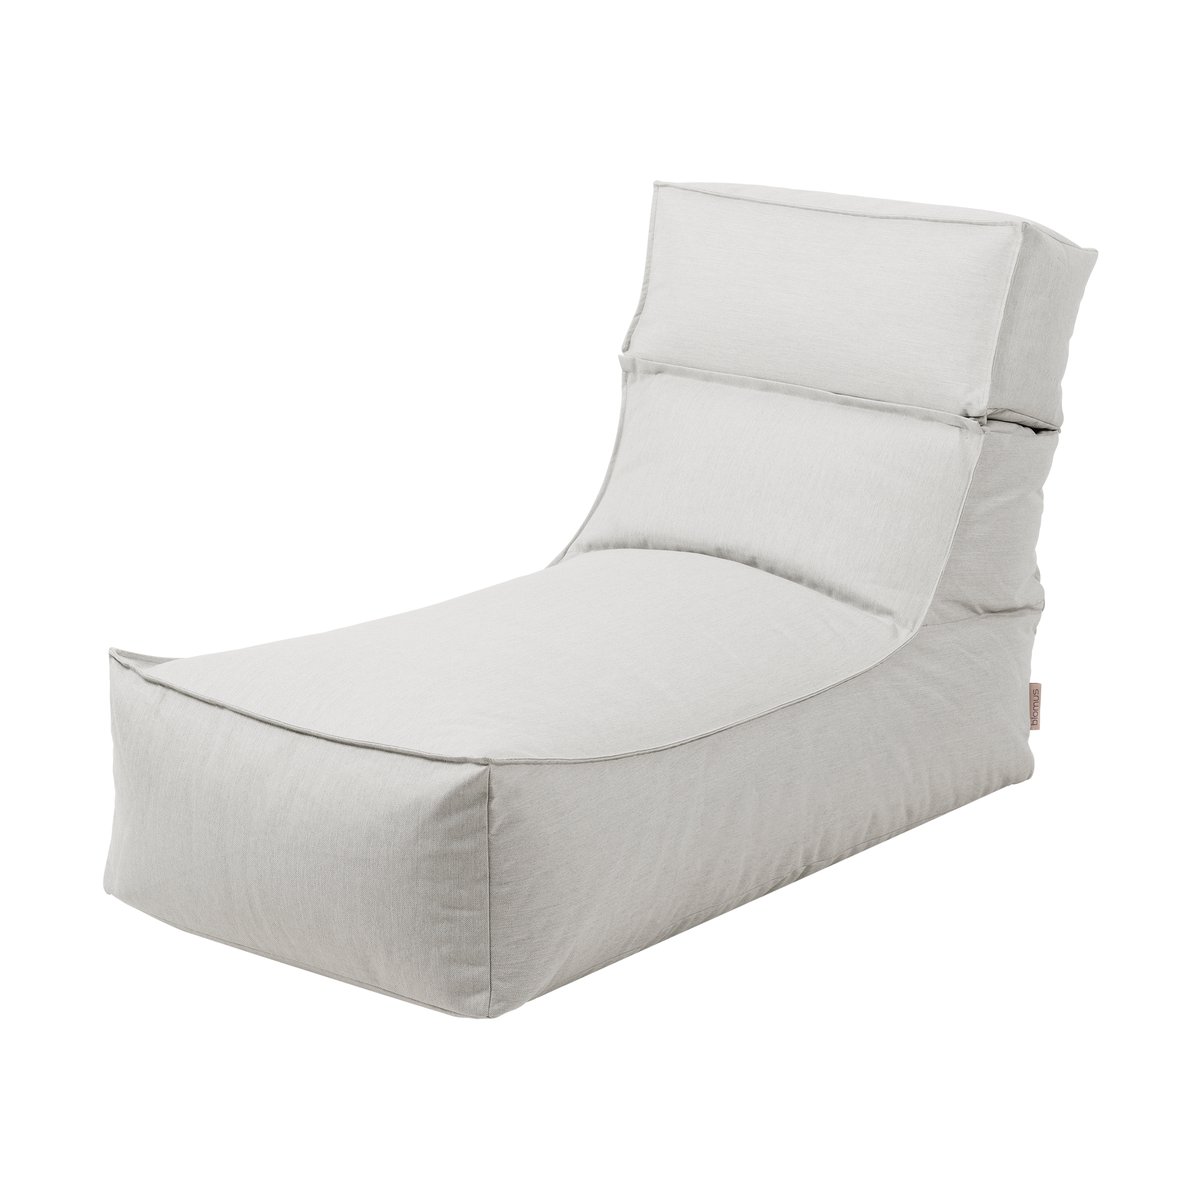 blomus STAY loungefauteuil poef 60x120 cm Cloud